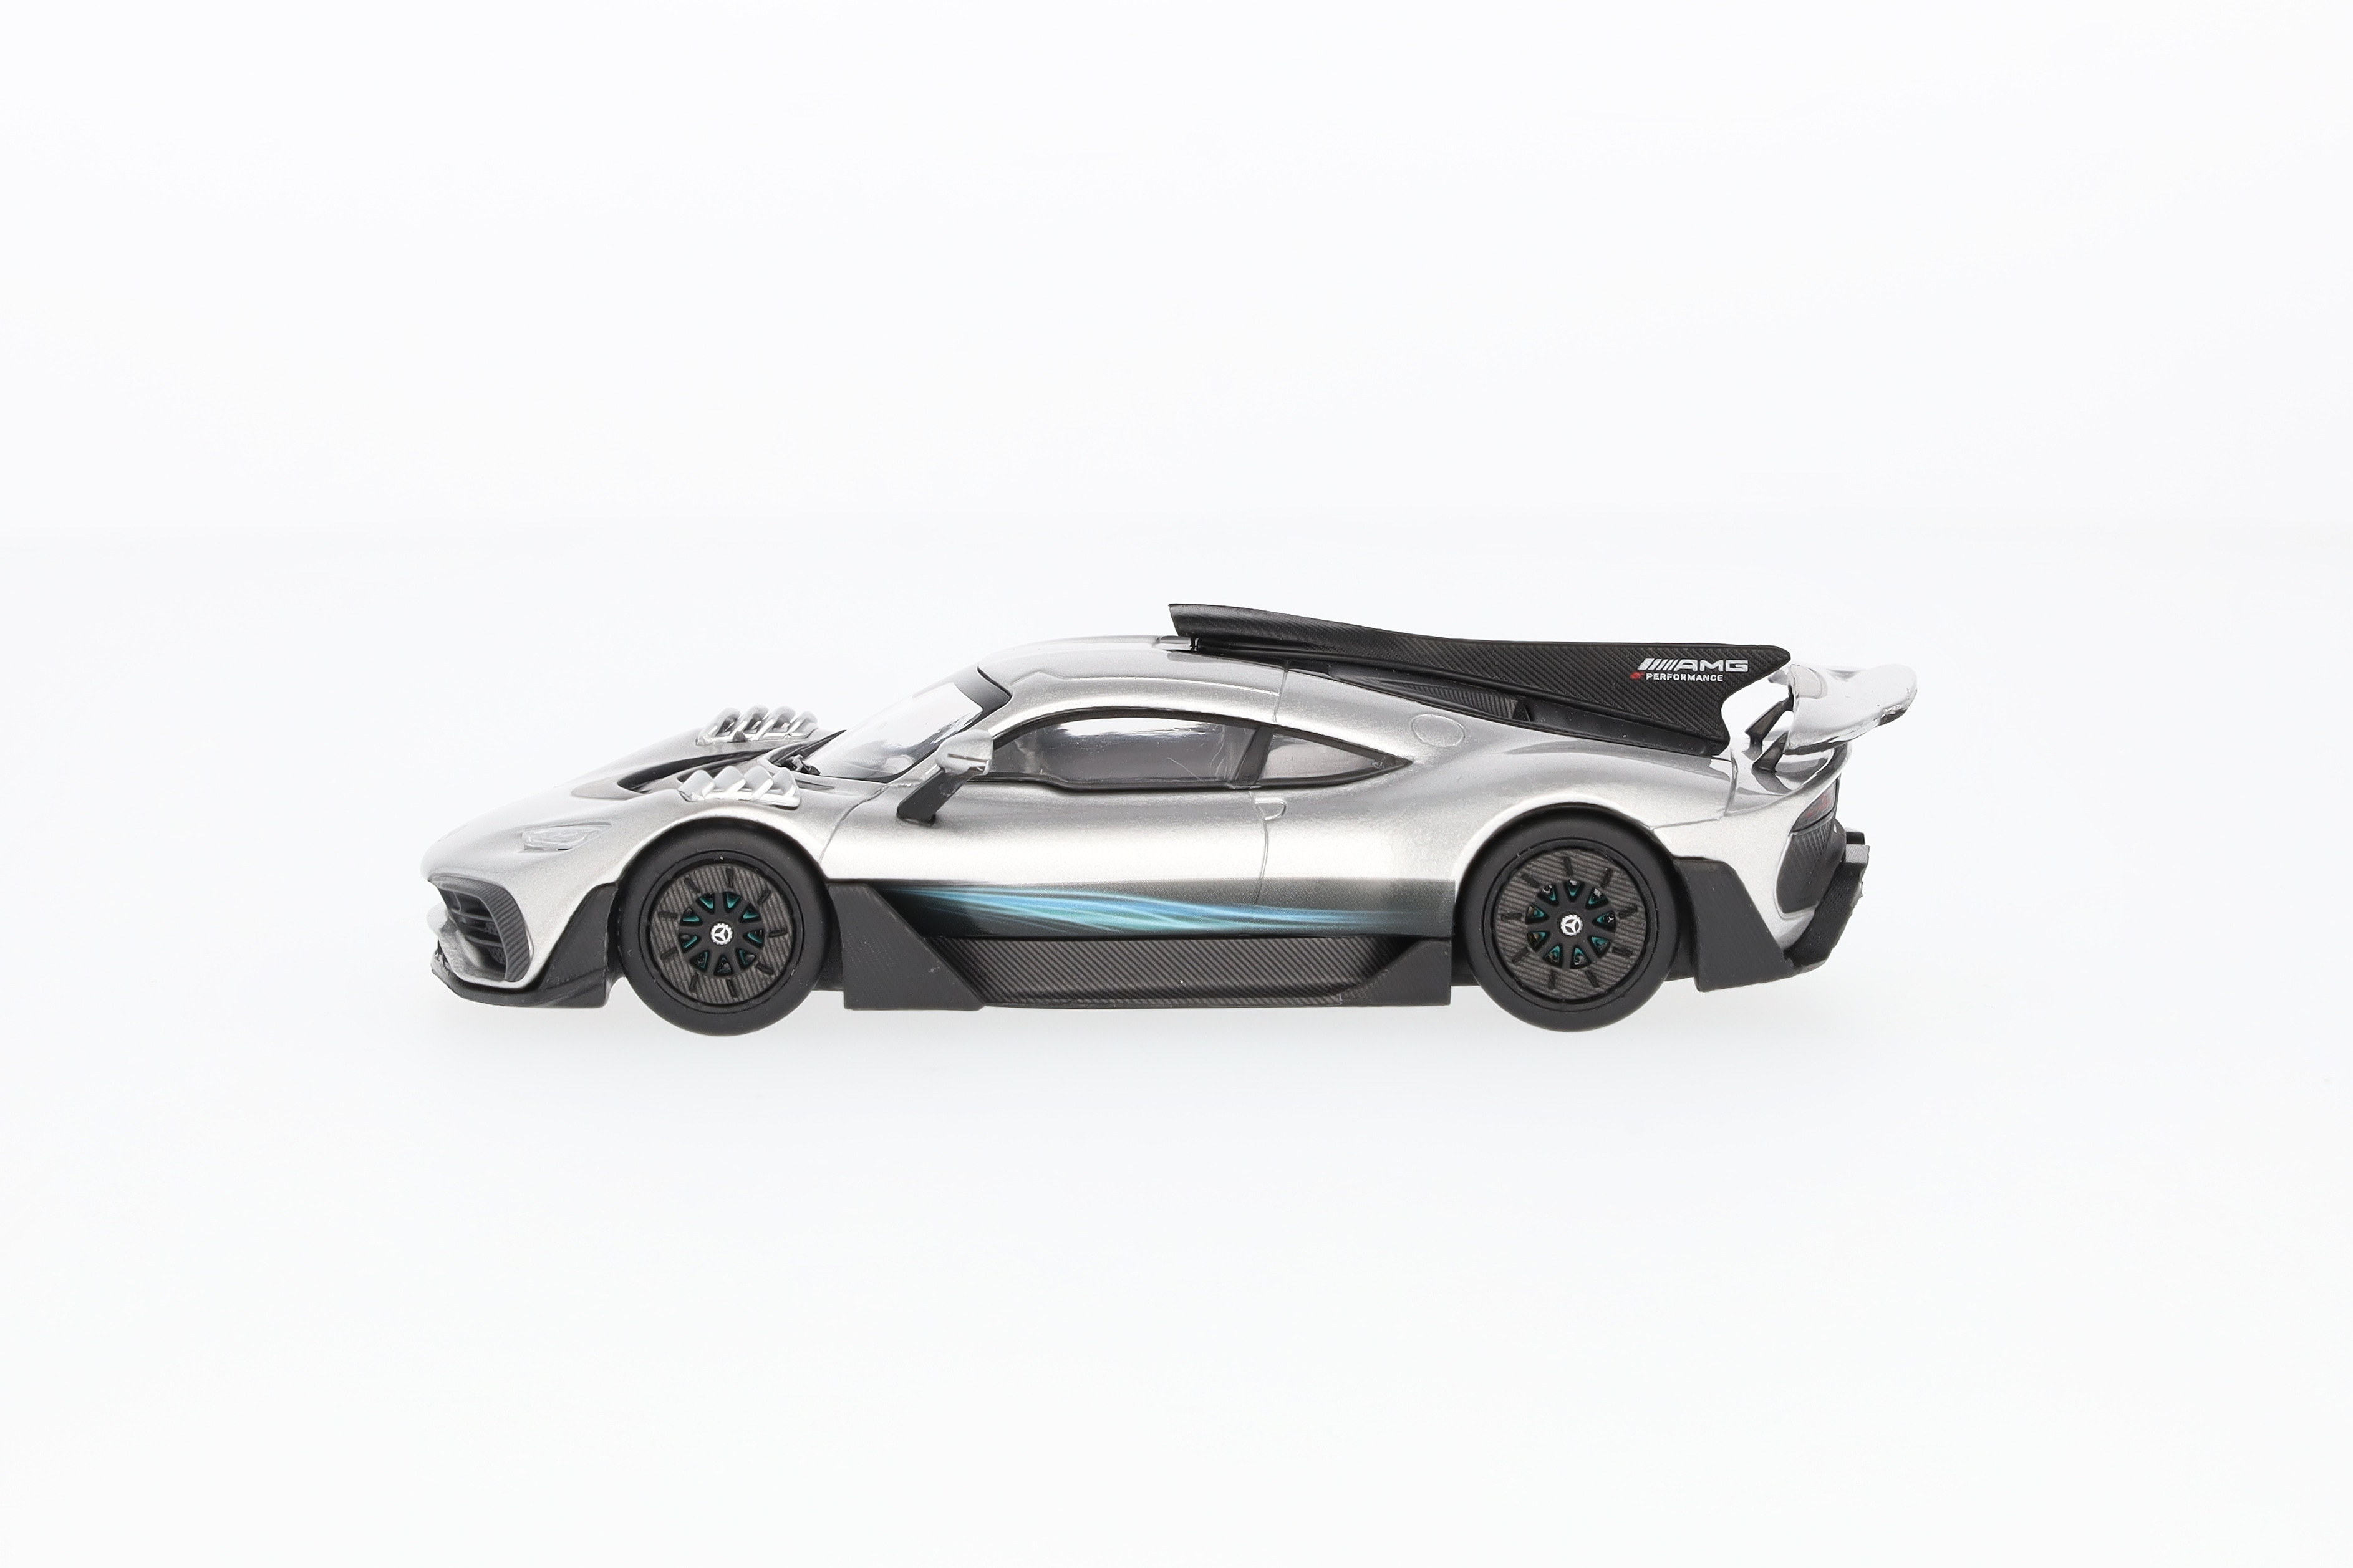 Mercedes-AMG ONE, C298, Race Version - silberfarben, iScale, 1:43